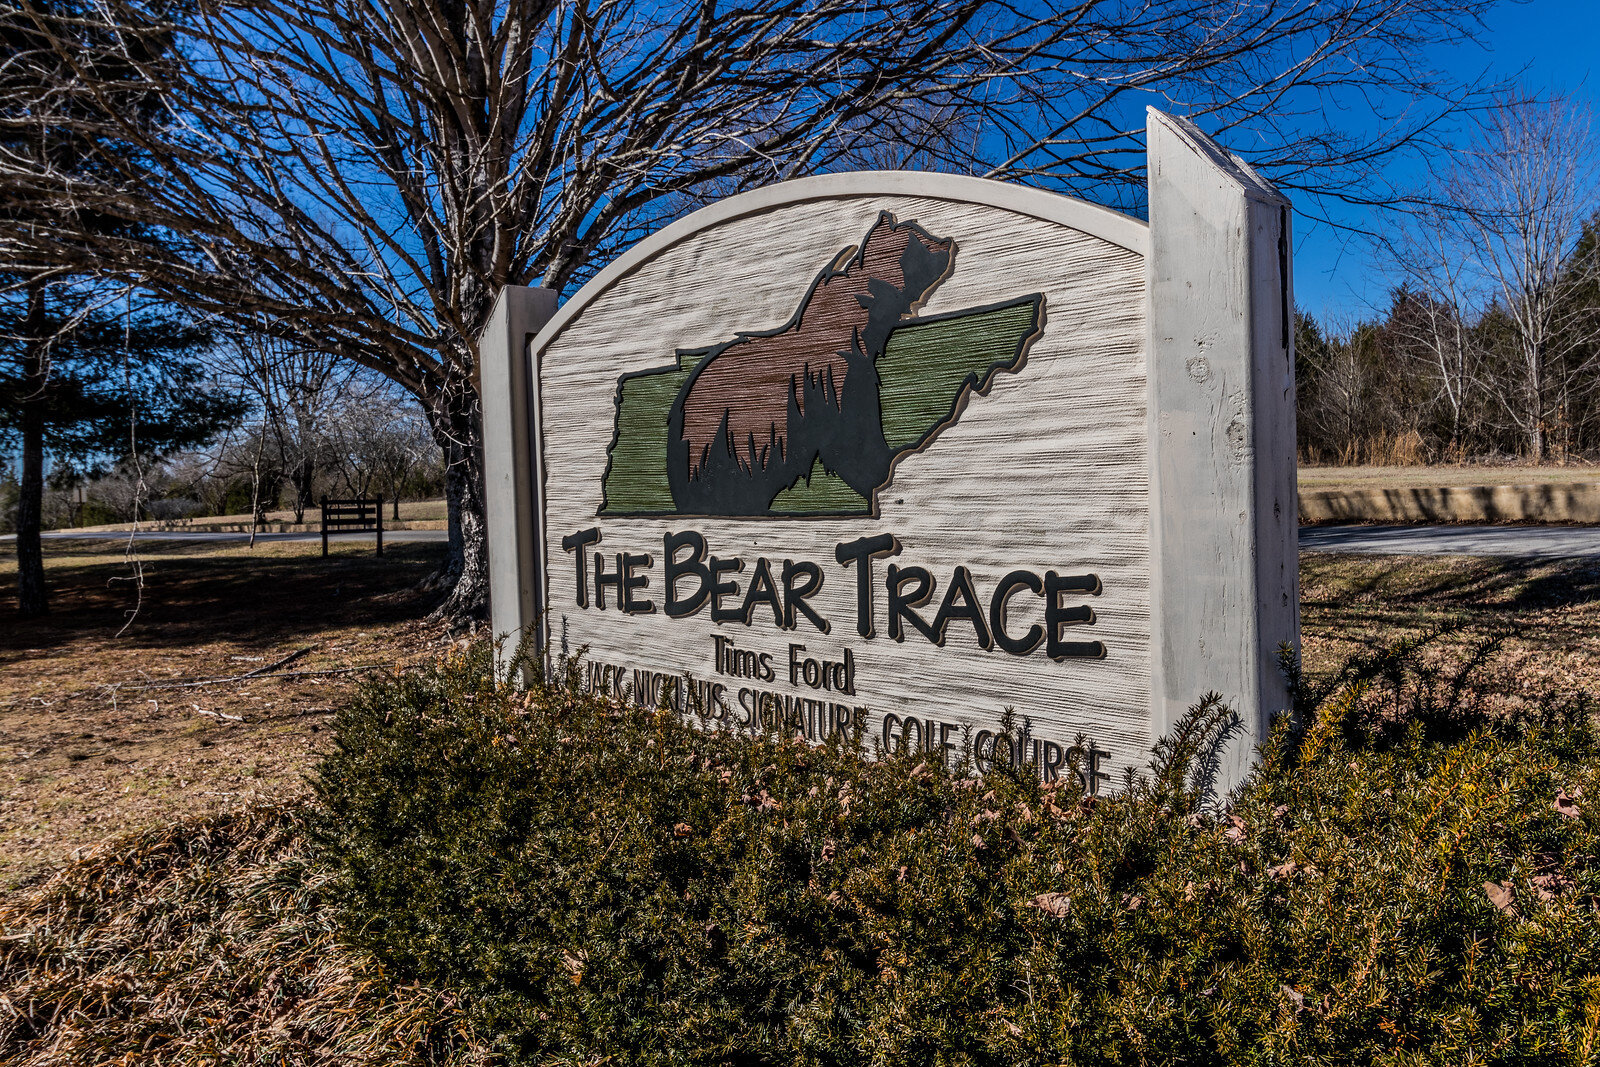 tims-ford-state-park-the-bear-trace.jpg